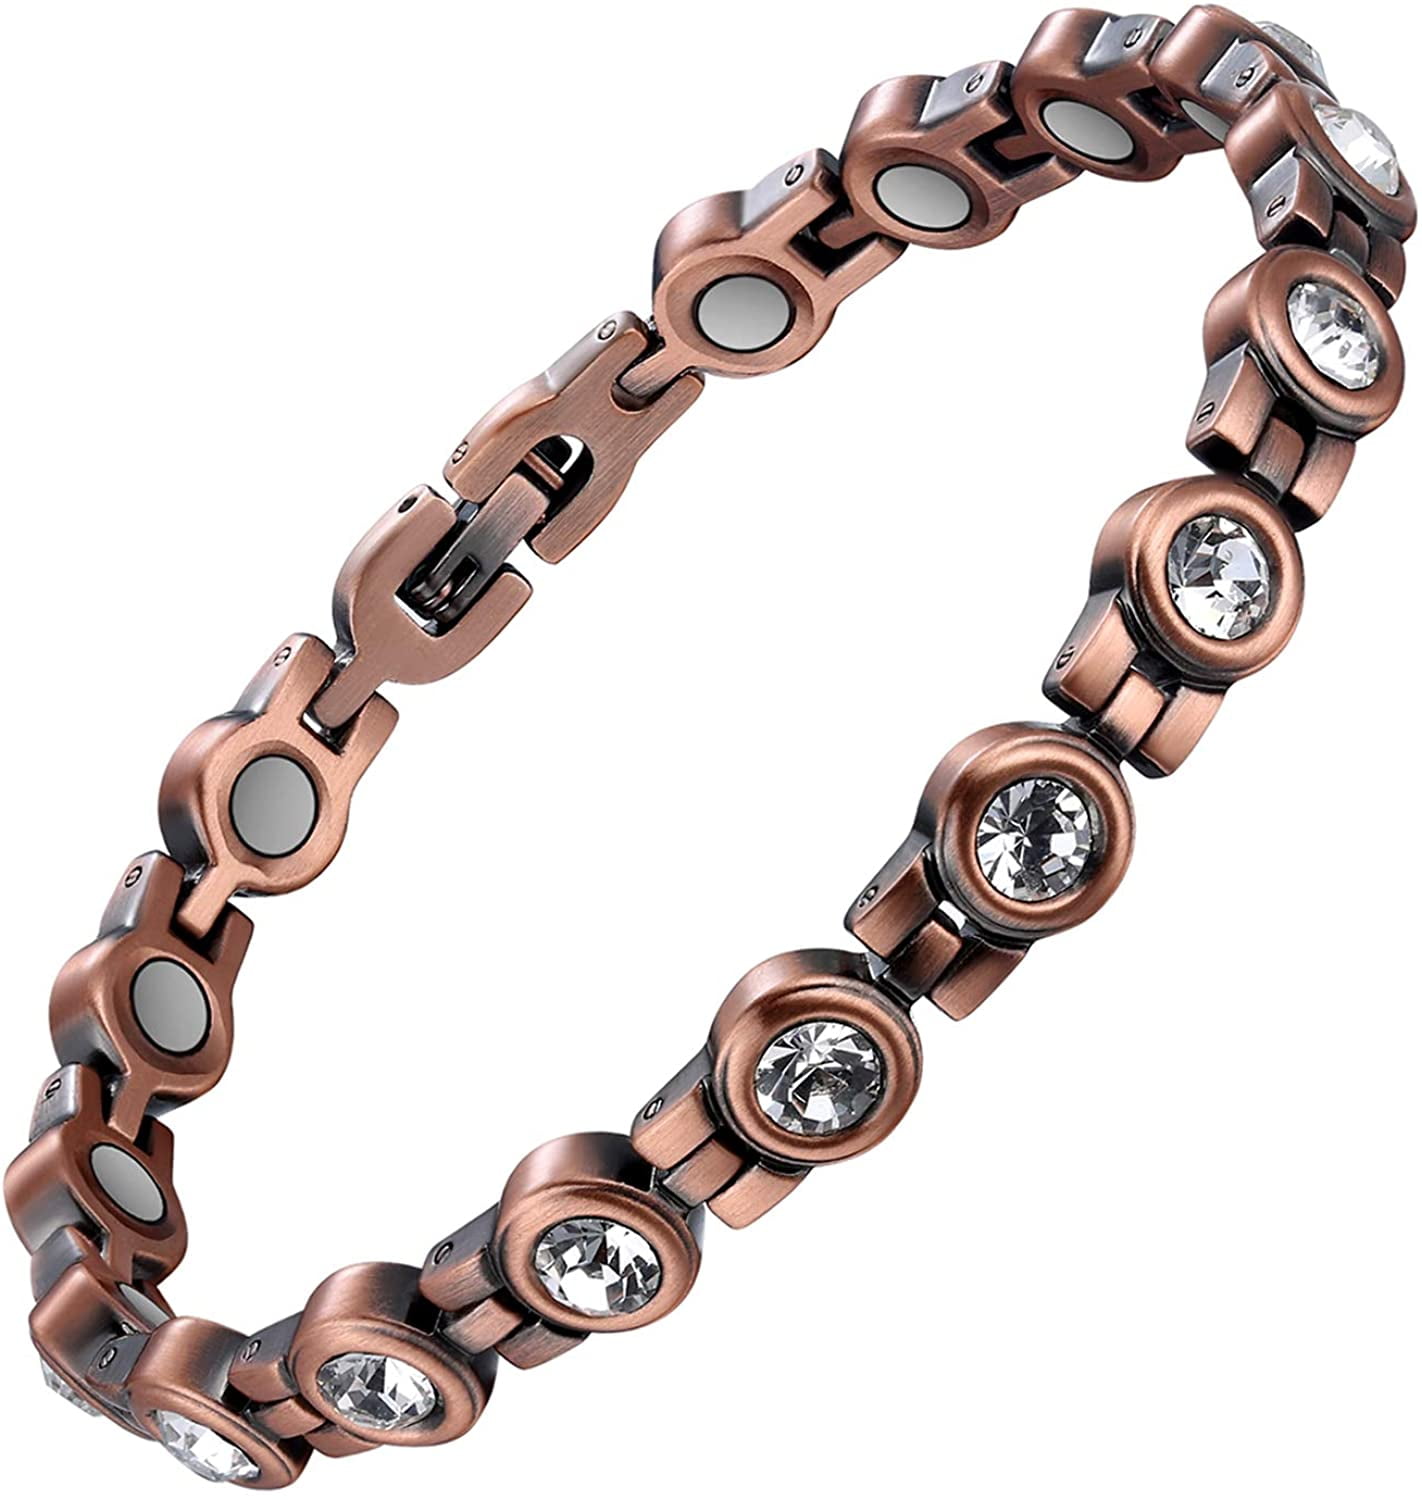 ENET Bracelet Pure Copper Magnetic Therapy Arthritis Pain Relief Bangle